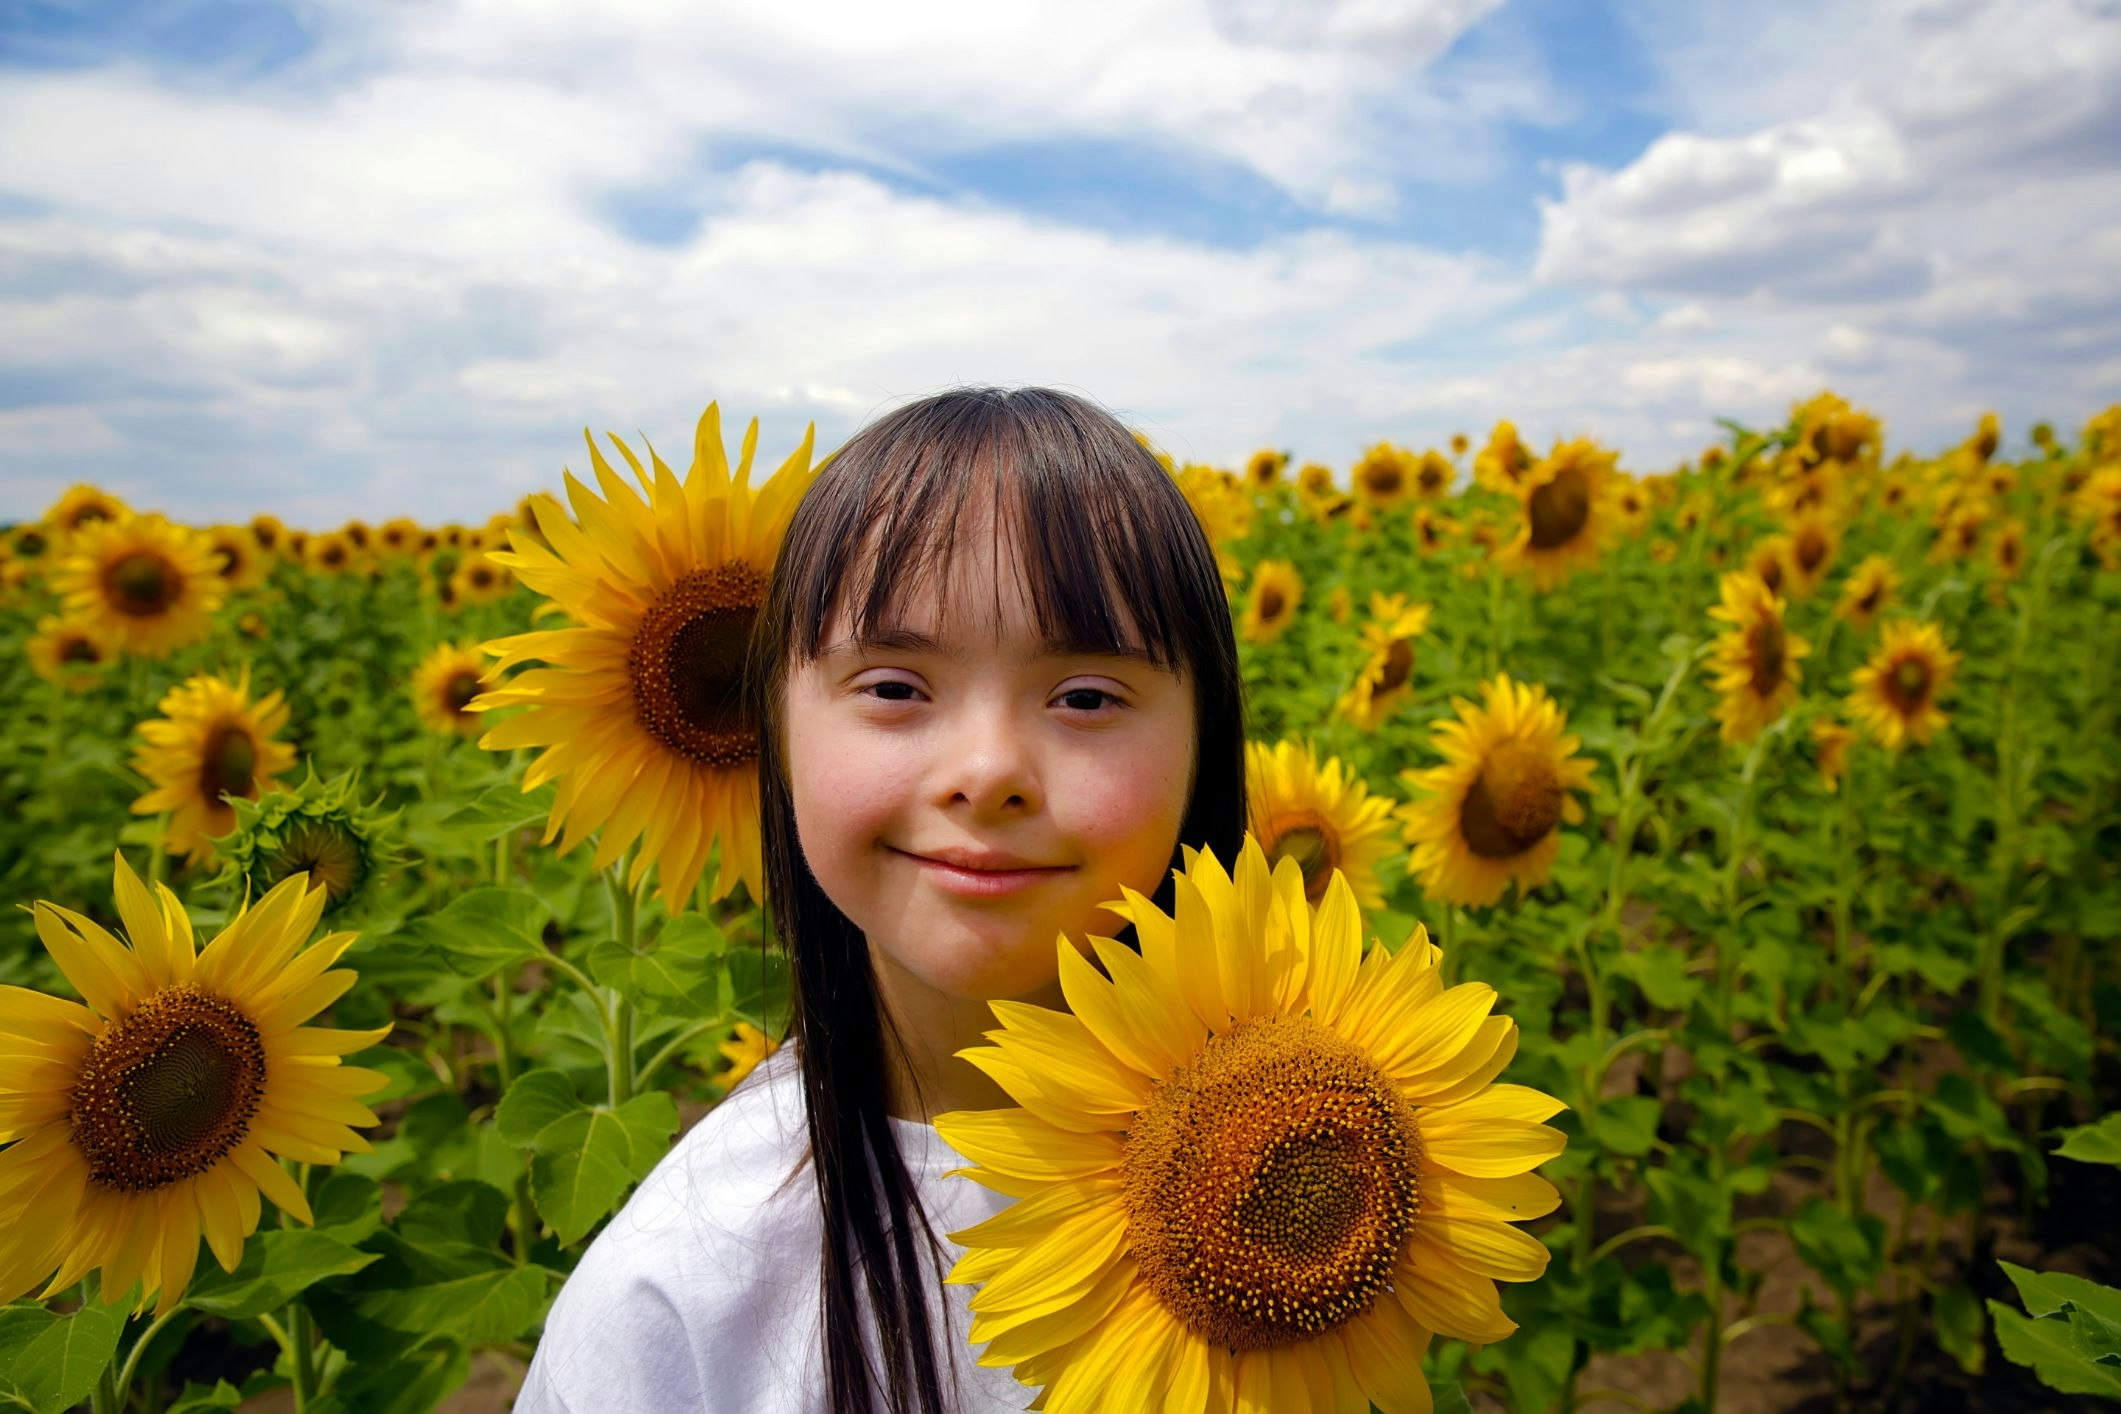 Not all events are disability-friendly, but the Kalbar Sunflower Festival is hoping to increase inclusivity in their outdoor event. [Source: Shutterstock]
